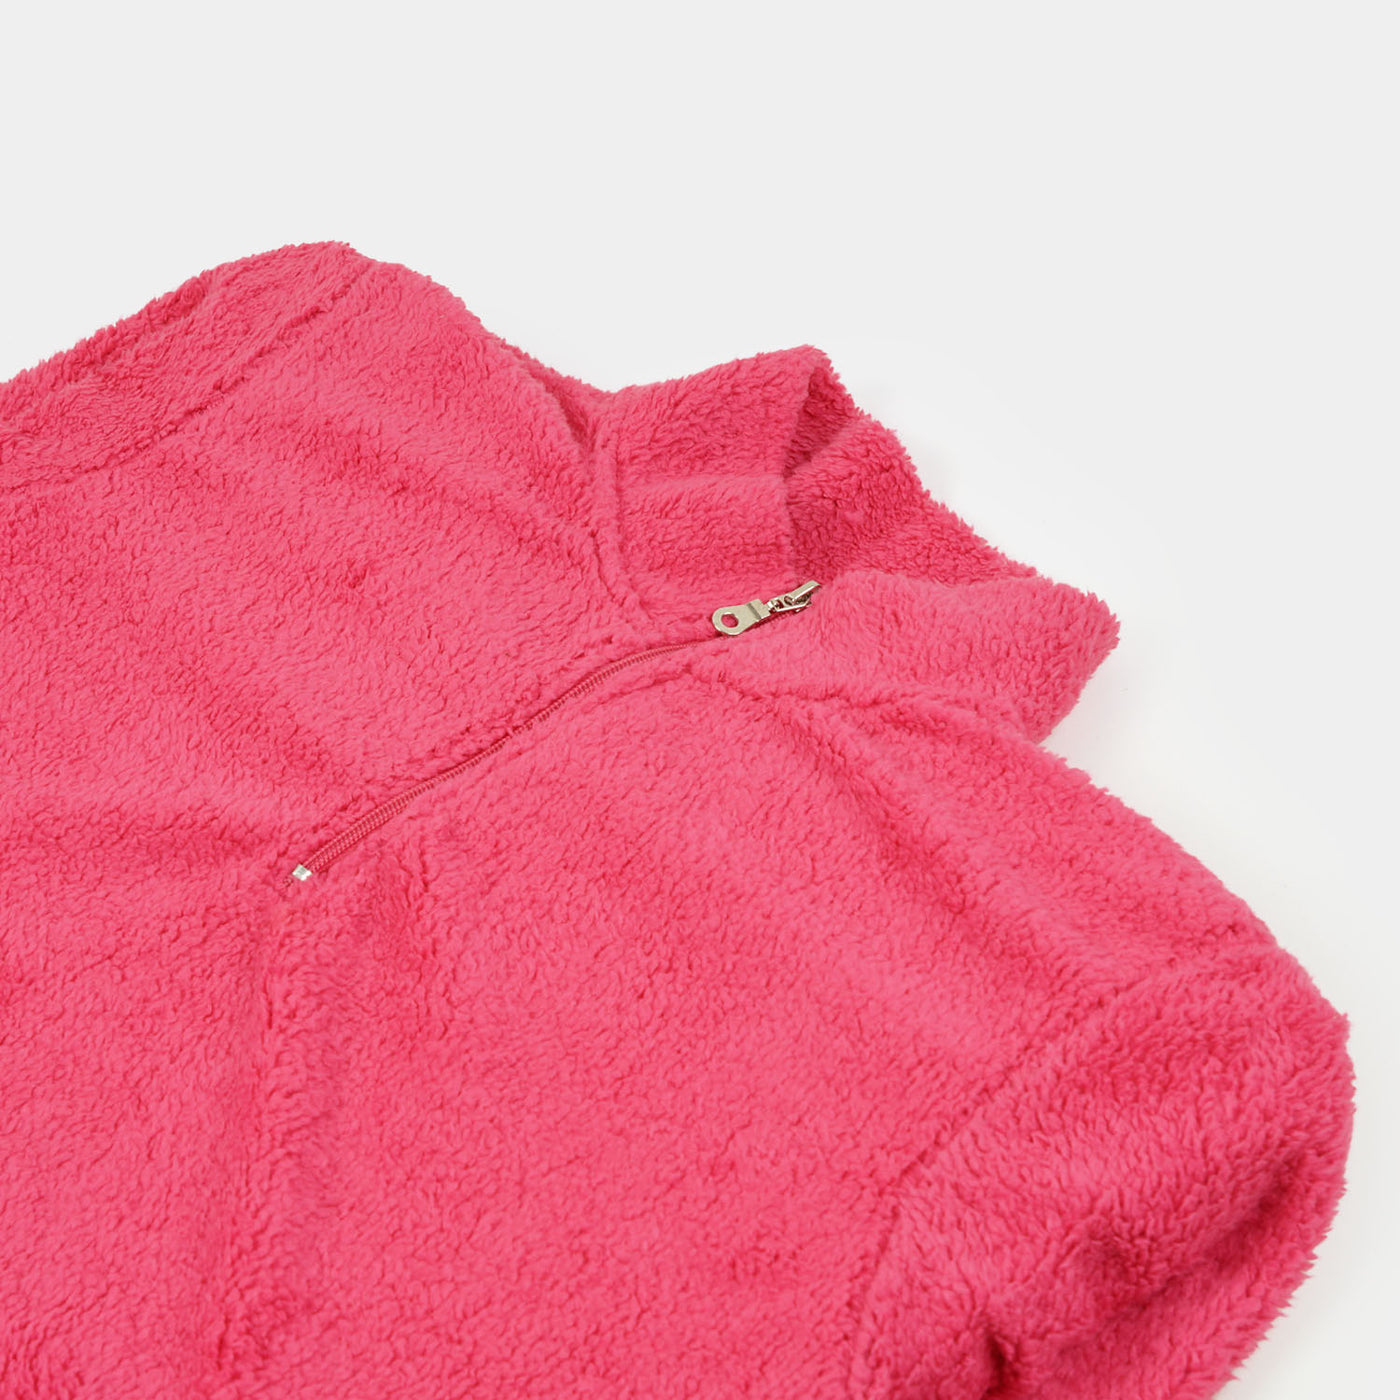 Teens Girls Knitted Jacket  - Pink